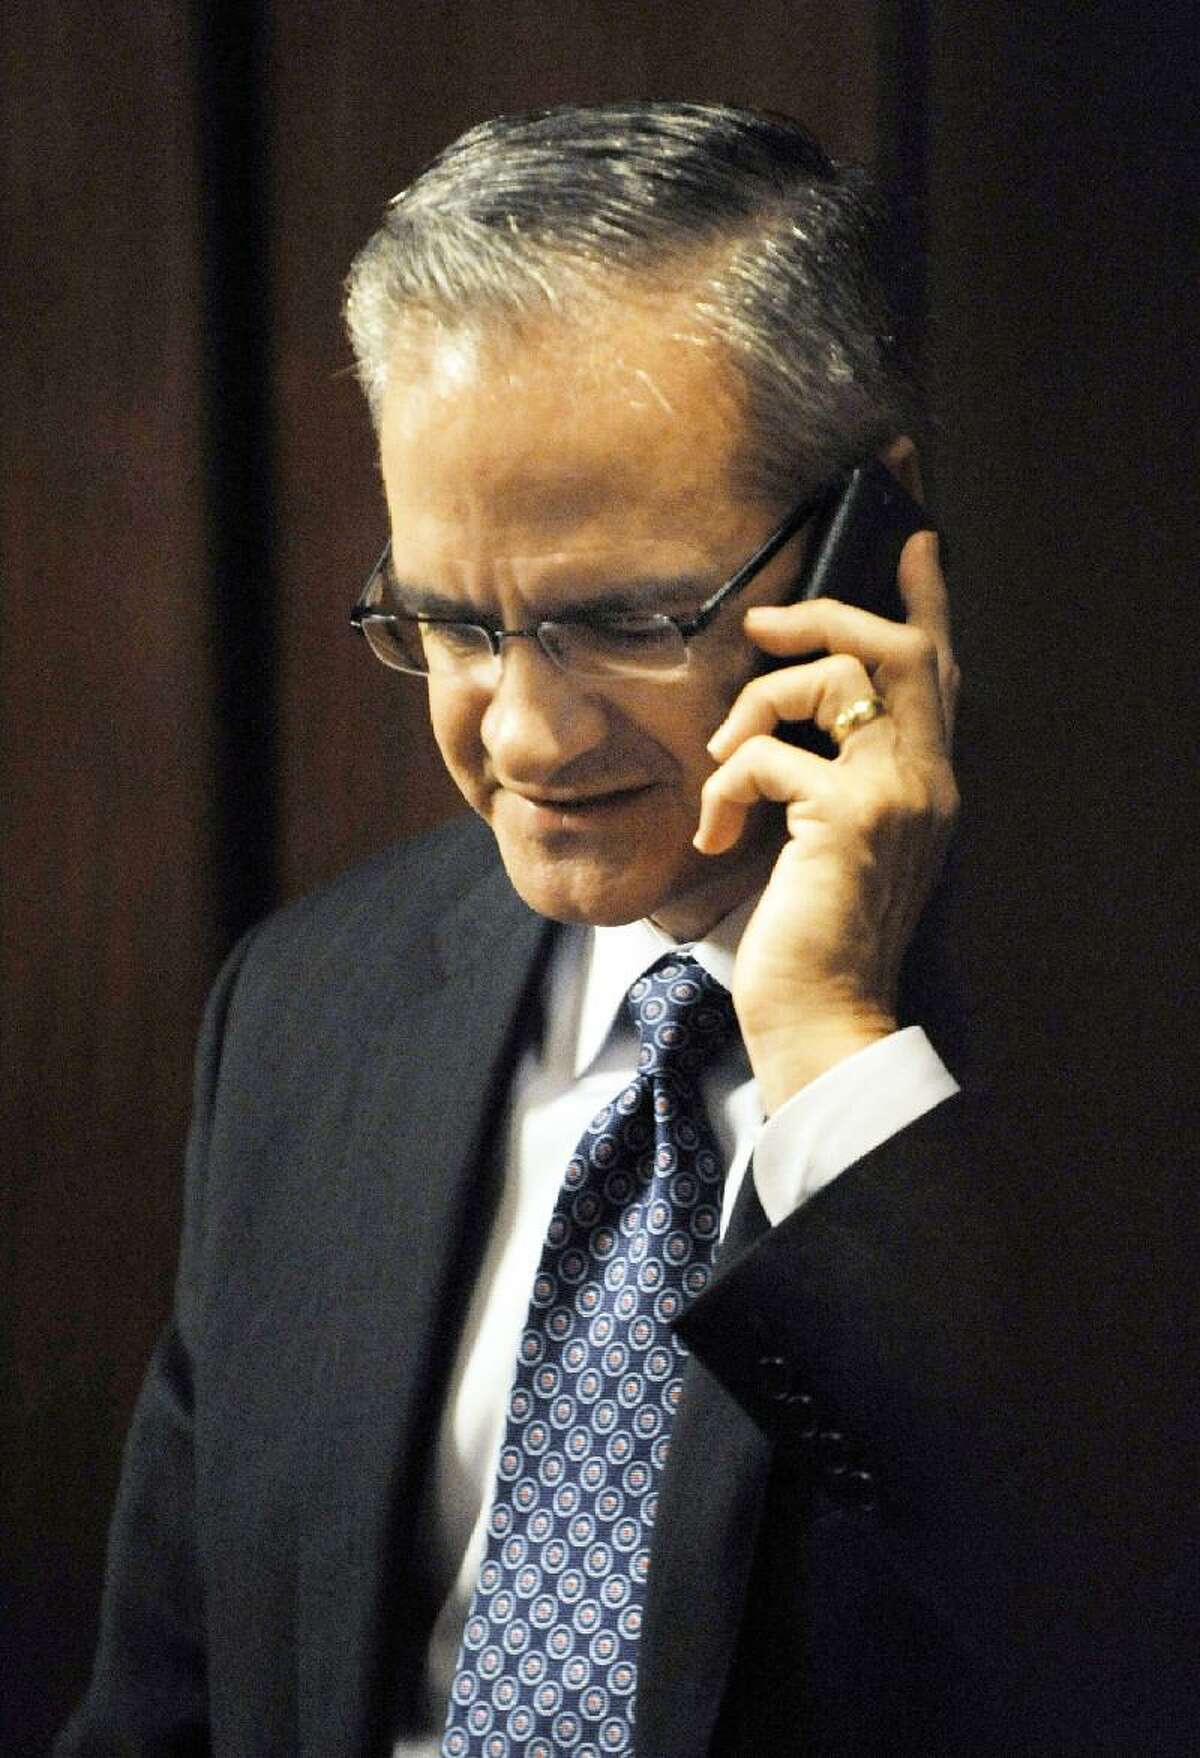 ASSOCIATED PRESS University of Connecticut athletic director Jeff Hathaway talks on his cell phone during a break from an NCAA infractions committee hearing in Indianapolis on Oct. 15, 2010. Hathaway has retired from the job after an unflattering review of his job performance.